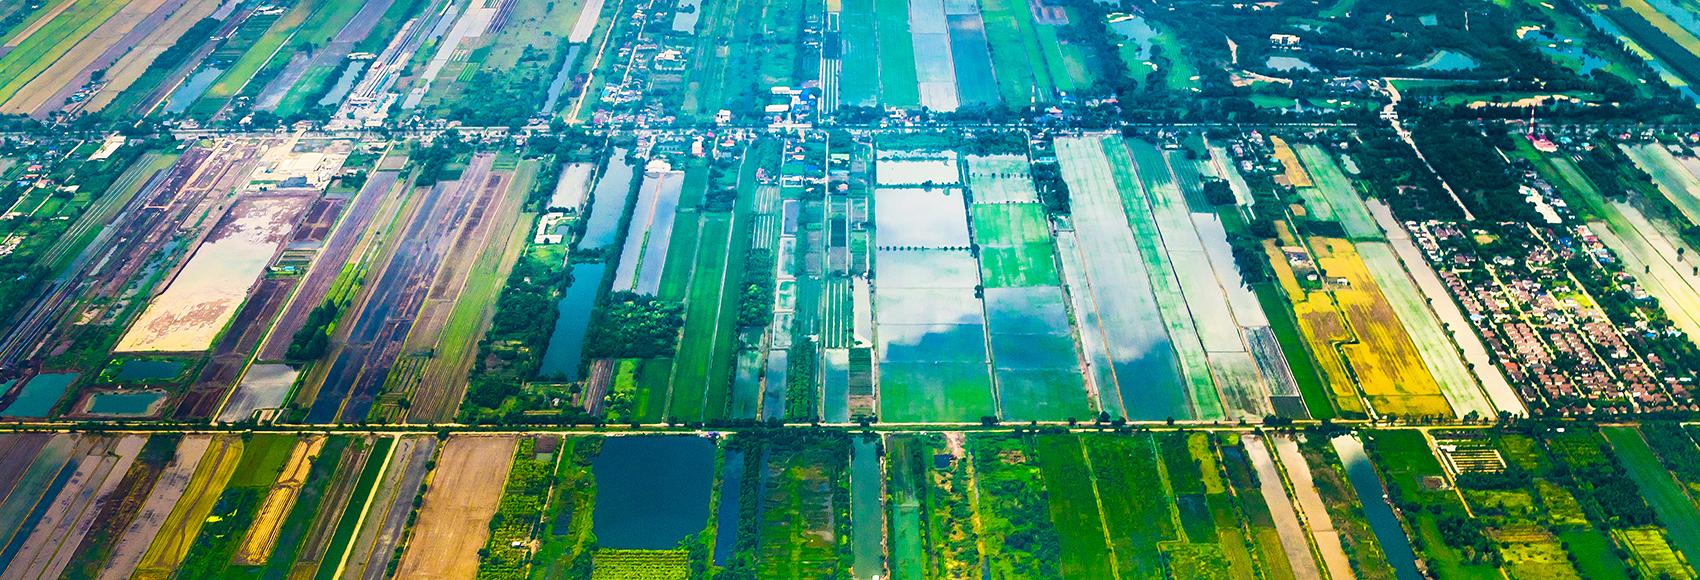 Aerial view of rural outskirts